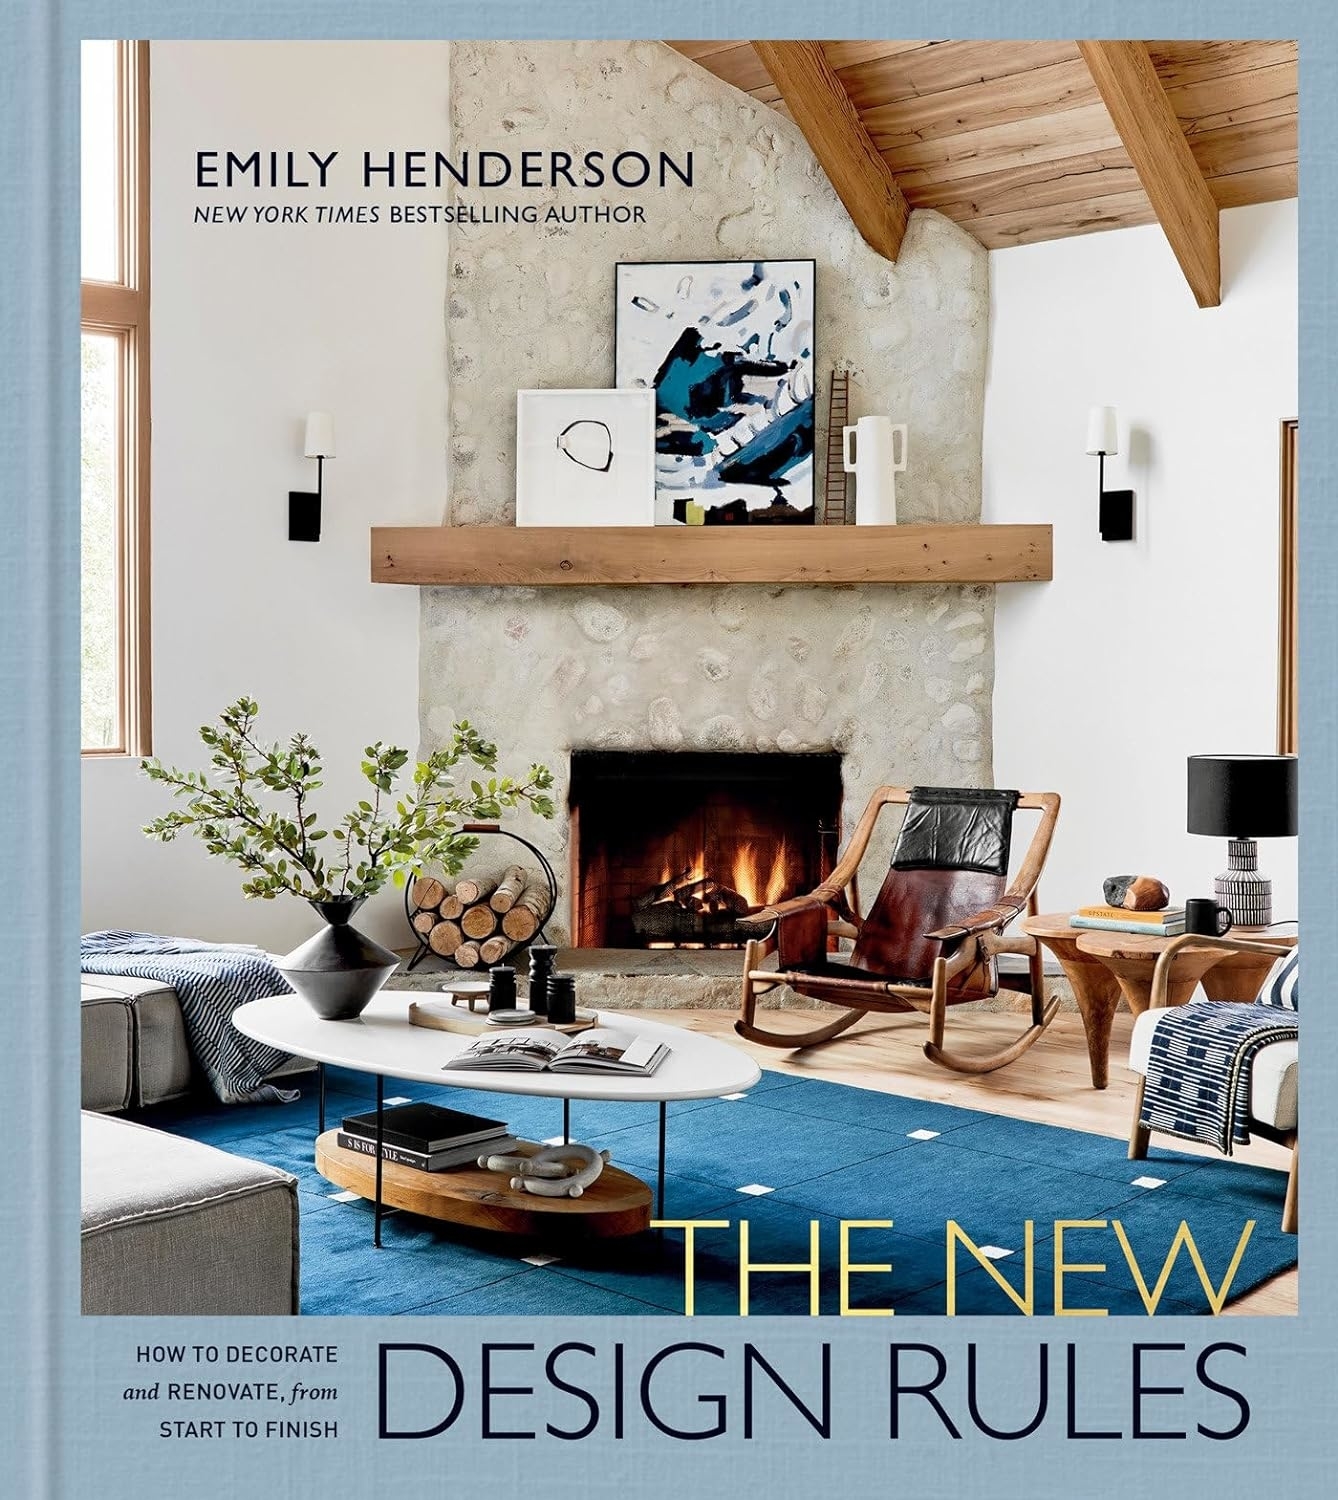 Cover of &quot;The New Design Rules&quot; by Emily Henderson, showcasing a well-decorated room with furniture and fireplace